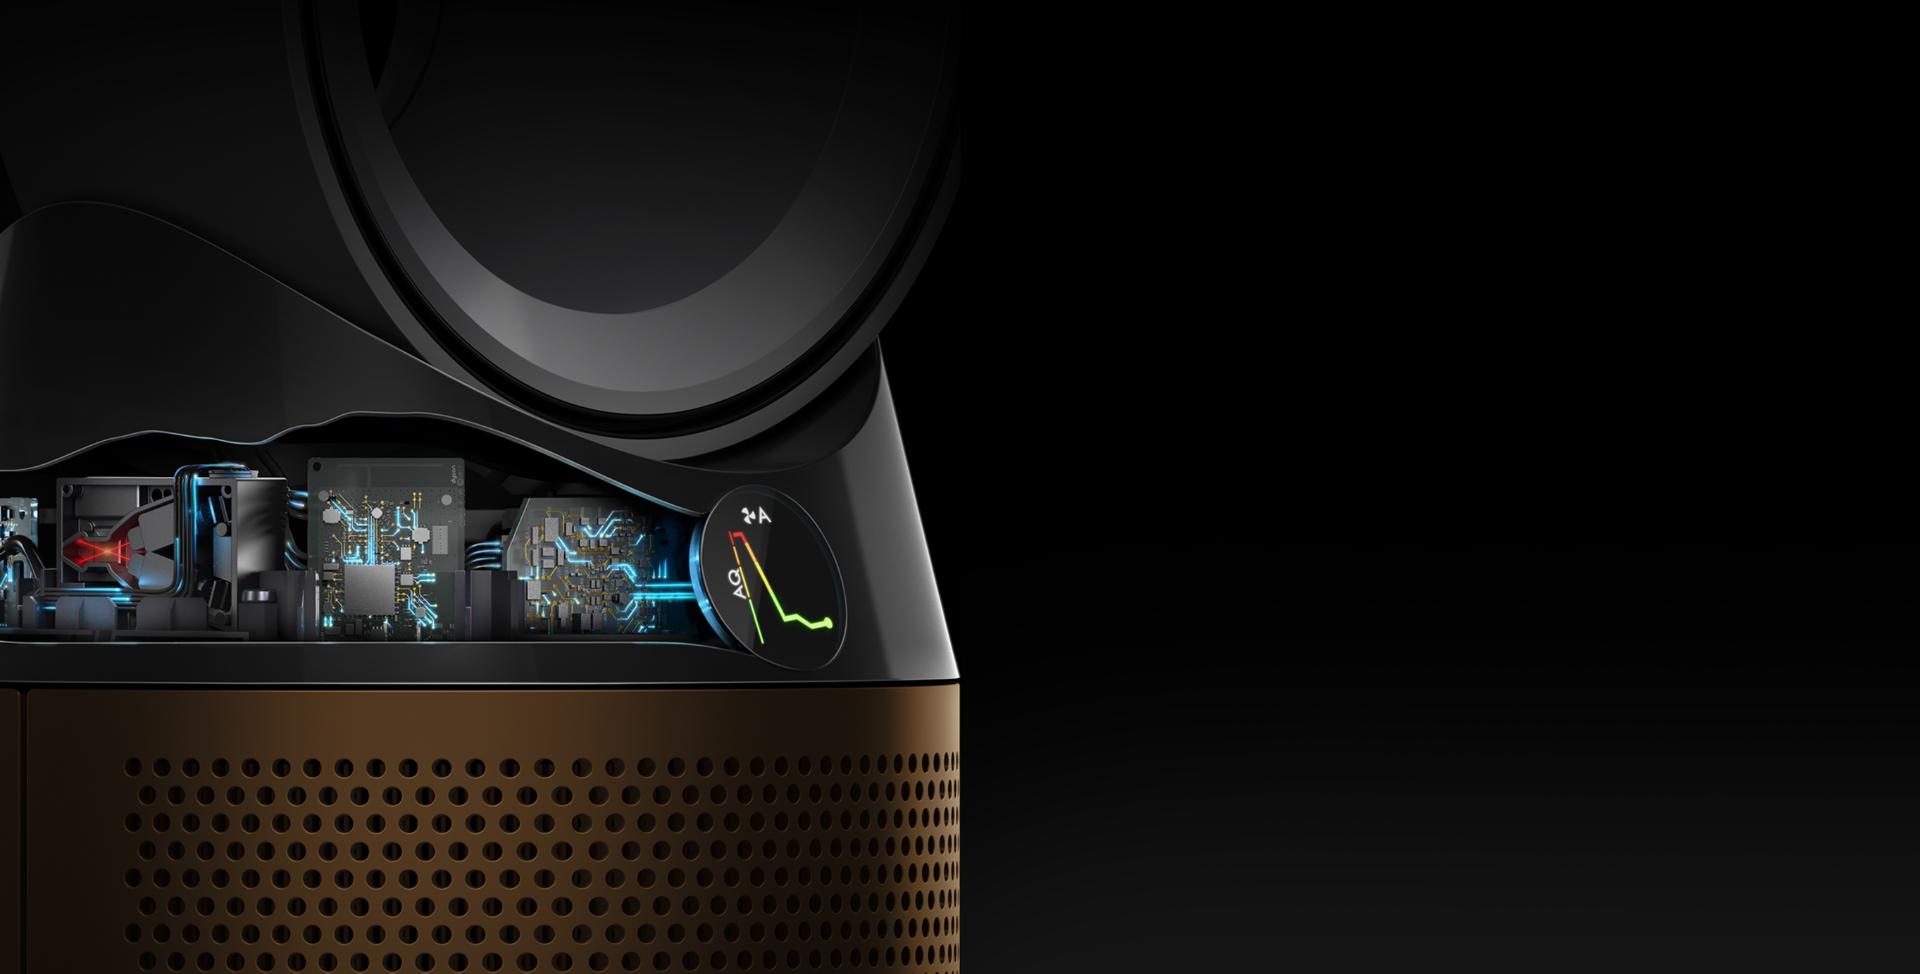 The Dyson Cryptomic purifier's LCD screen, detecting airborne pollution.